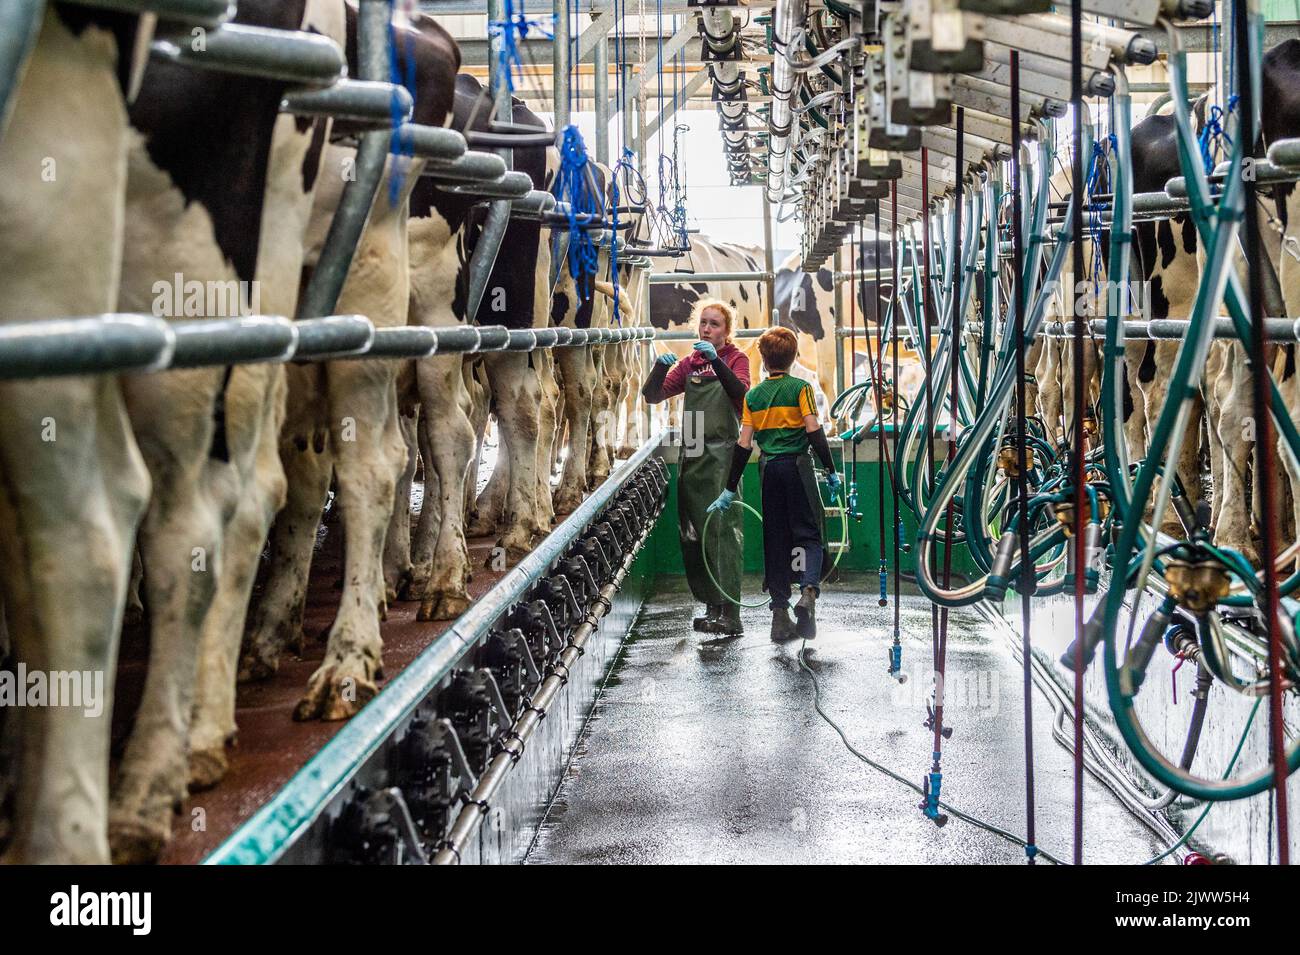 Farming: Timoleague, West Cork, Ireland. 6th Sept, 2022. The 160 strong herd of dairy farmer DJ Keohane  are milked at his farm in Timoleague, West Cork. DJ's son, Daniel aged 11 and daughter Clíodhna, 15 help with the milking. The parlour holds 20 cows each side and milking is completed within an hour. DJ is currently yielding approx. 20 litres per cow. Credit: AG News/Alamy Live News. Stock Photo